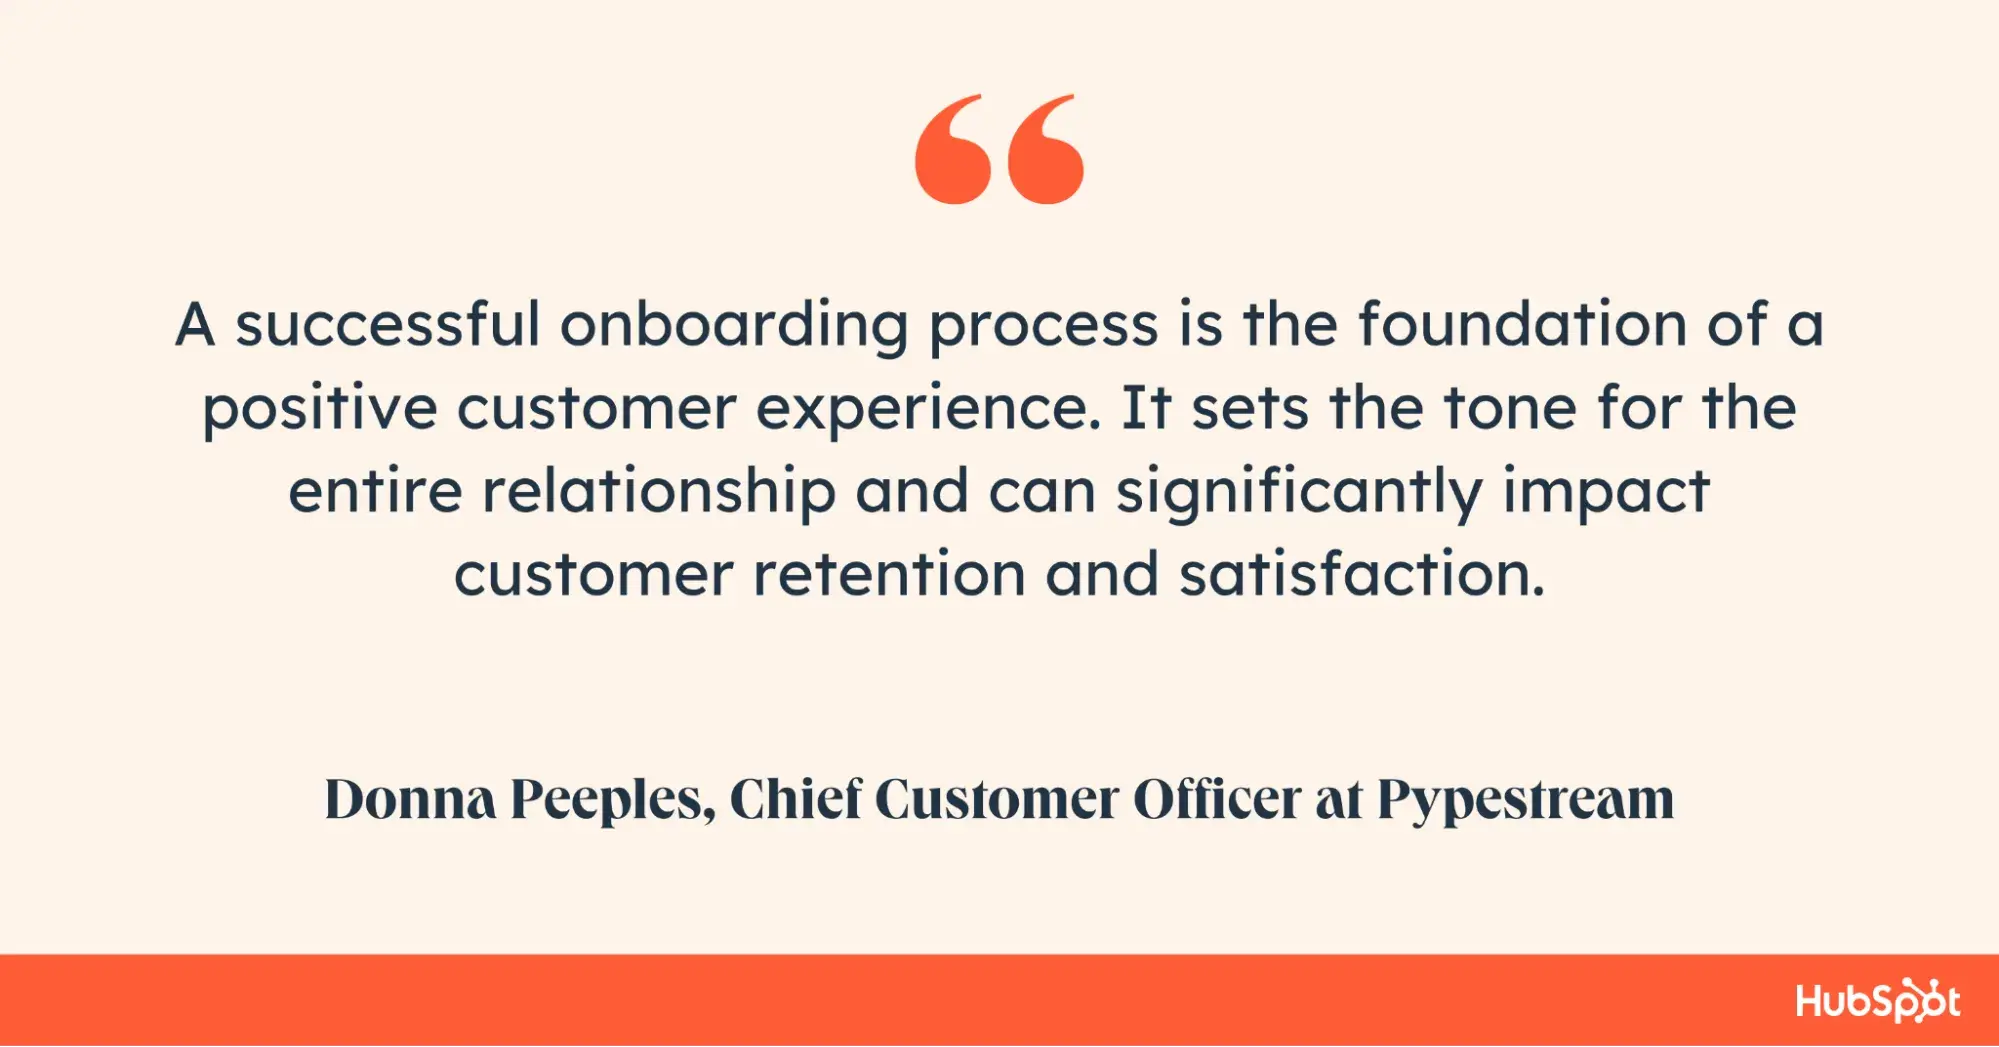 Quote on what it takes to have a successful onboarding process